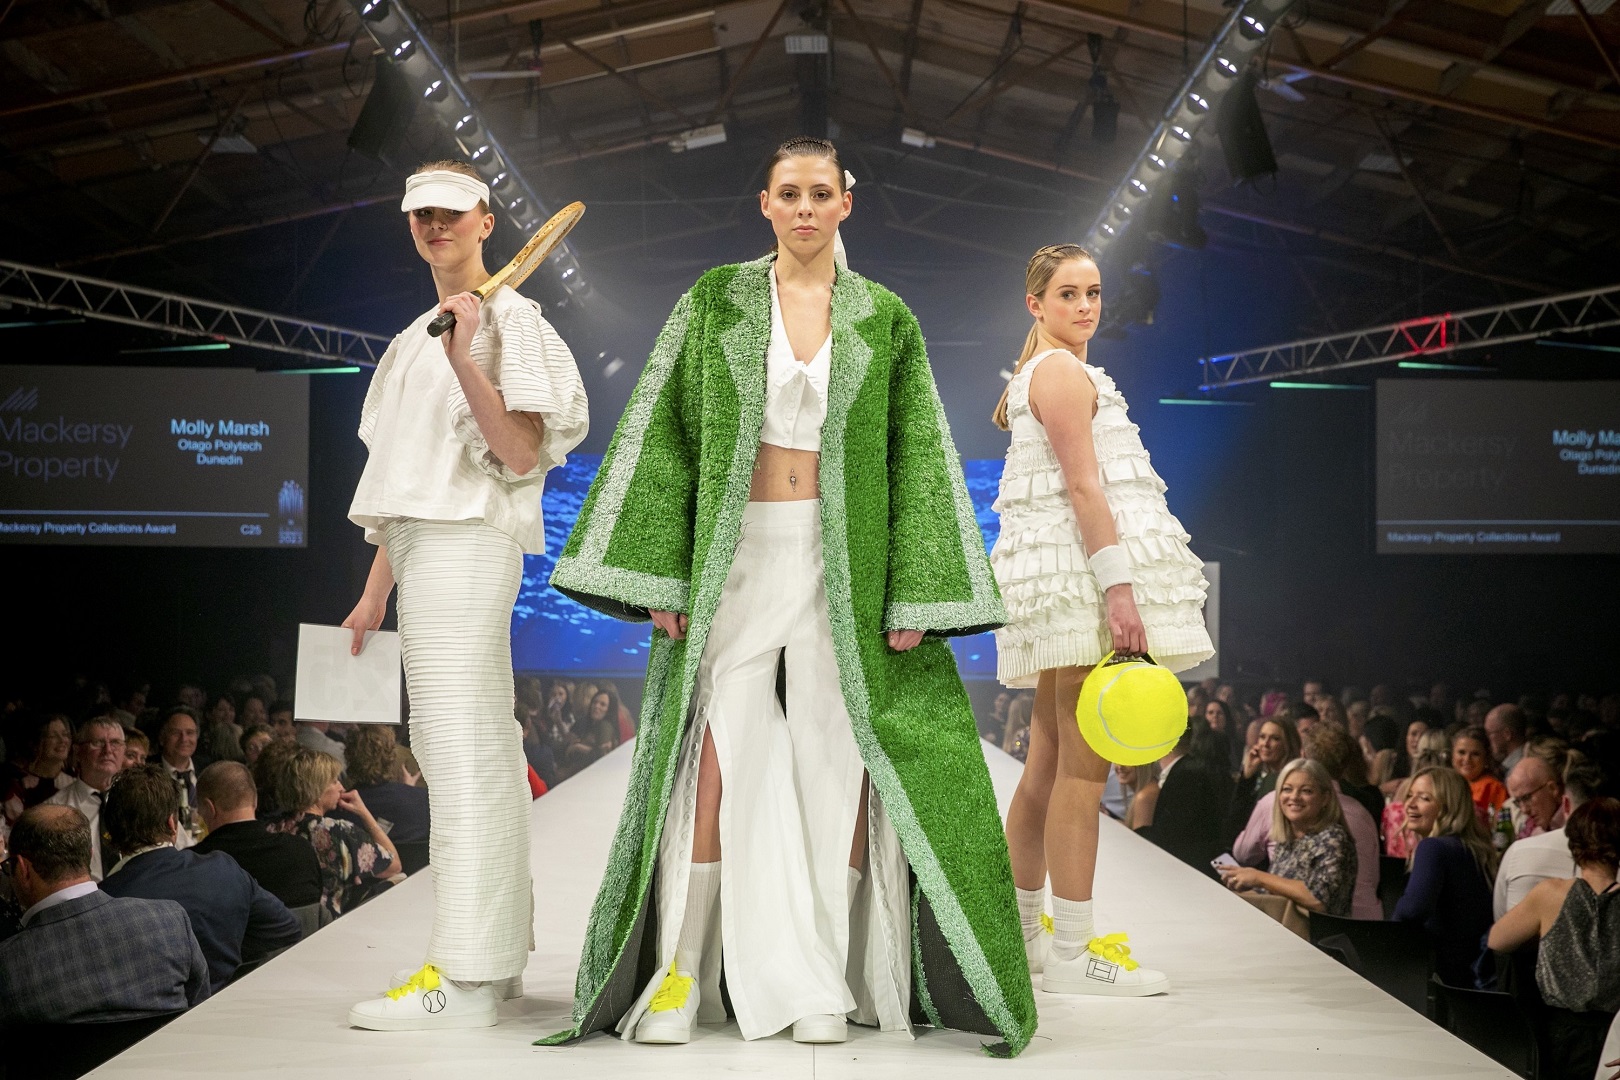 Molly Marsh’s collection of three tennis-inspired garments on the catwalk at Hokonui Fashion...